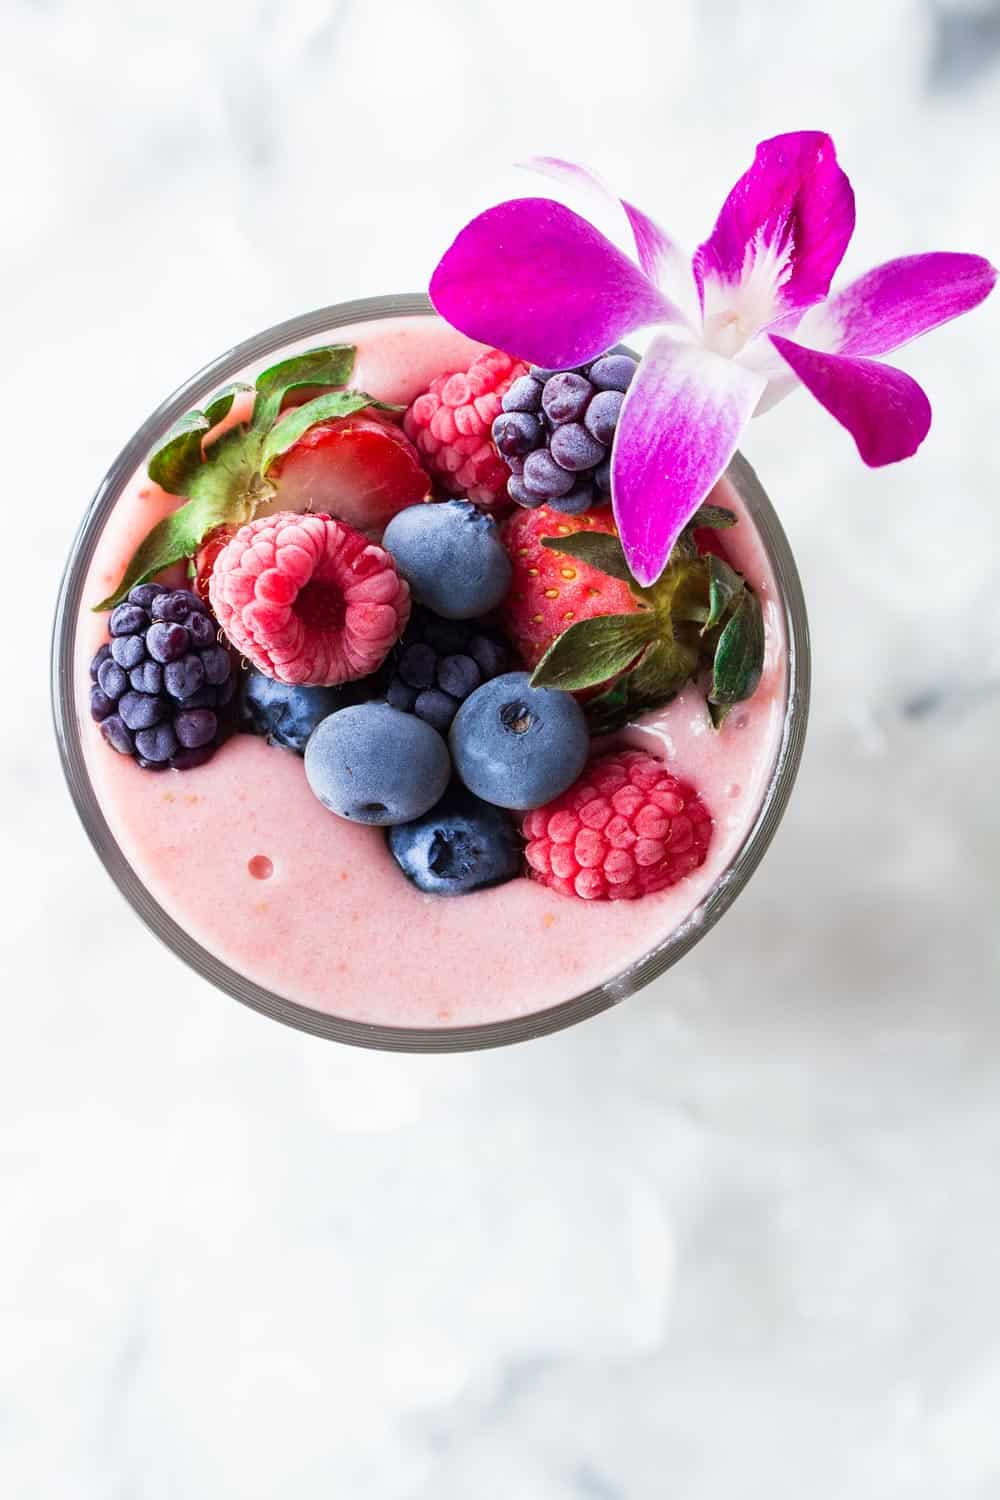 Top view of strawberry banana smoothie without yogurt, topped with raspberries, blueberries, strawberries and blackberries. 